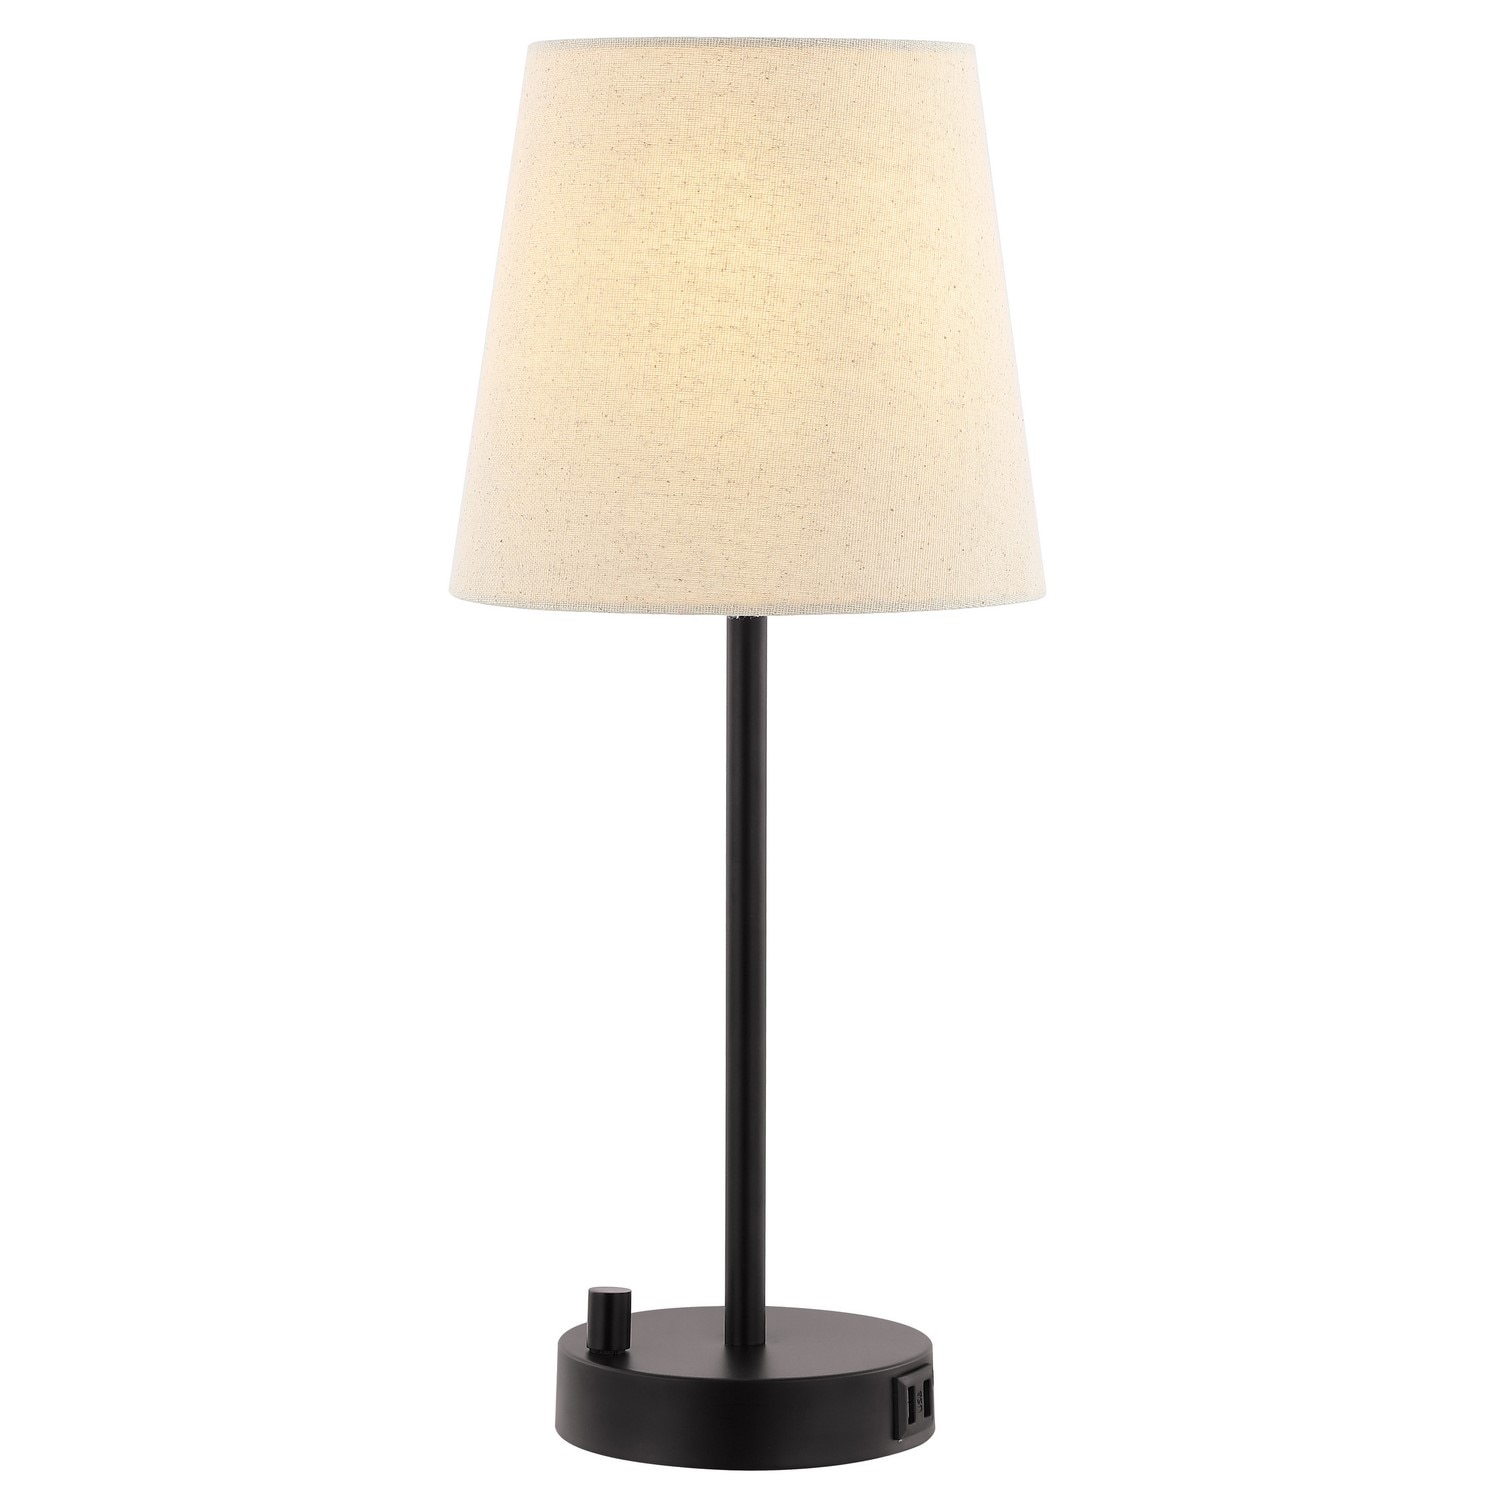 Fowley 18.75" Table Lamp With USB